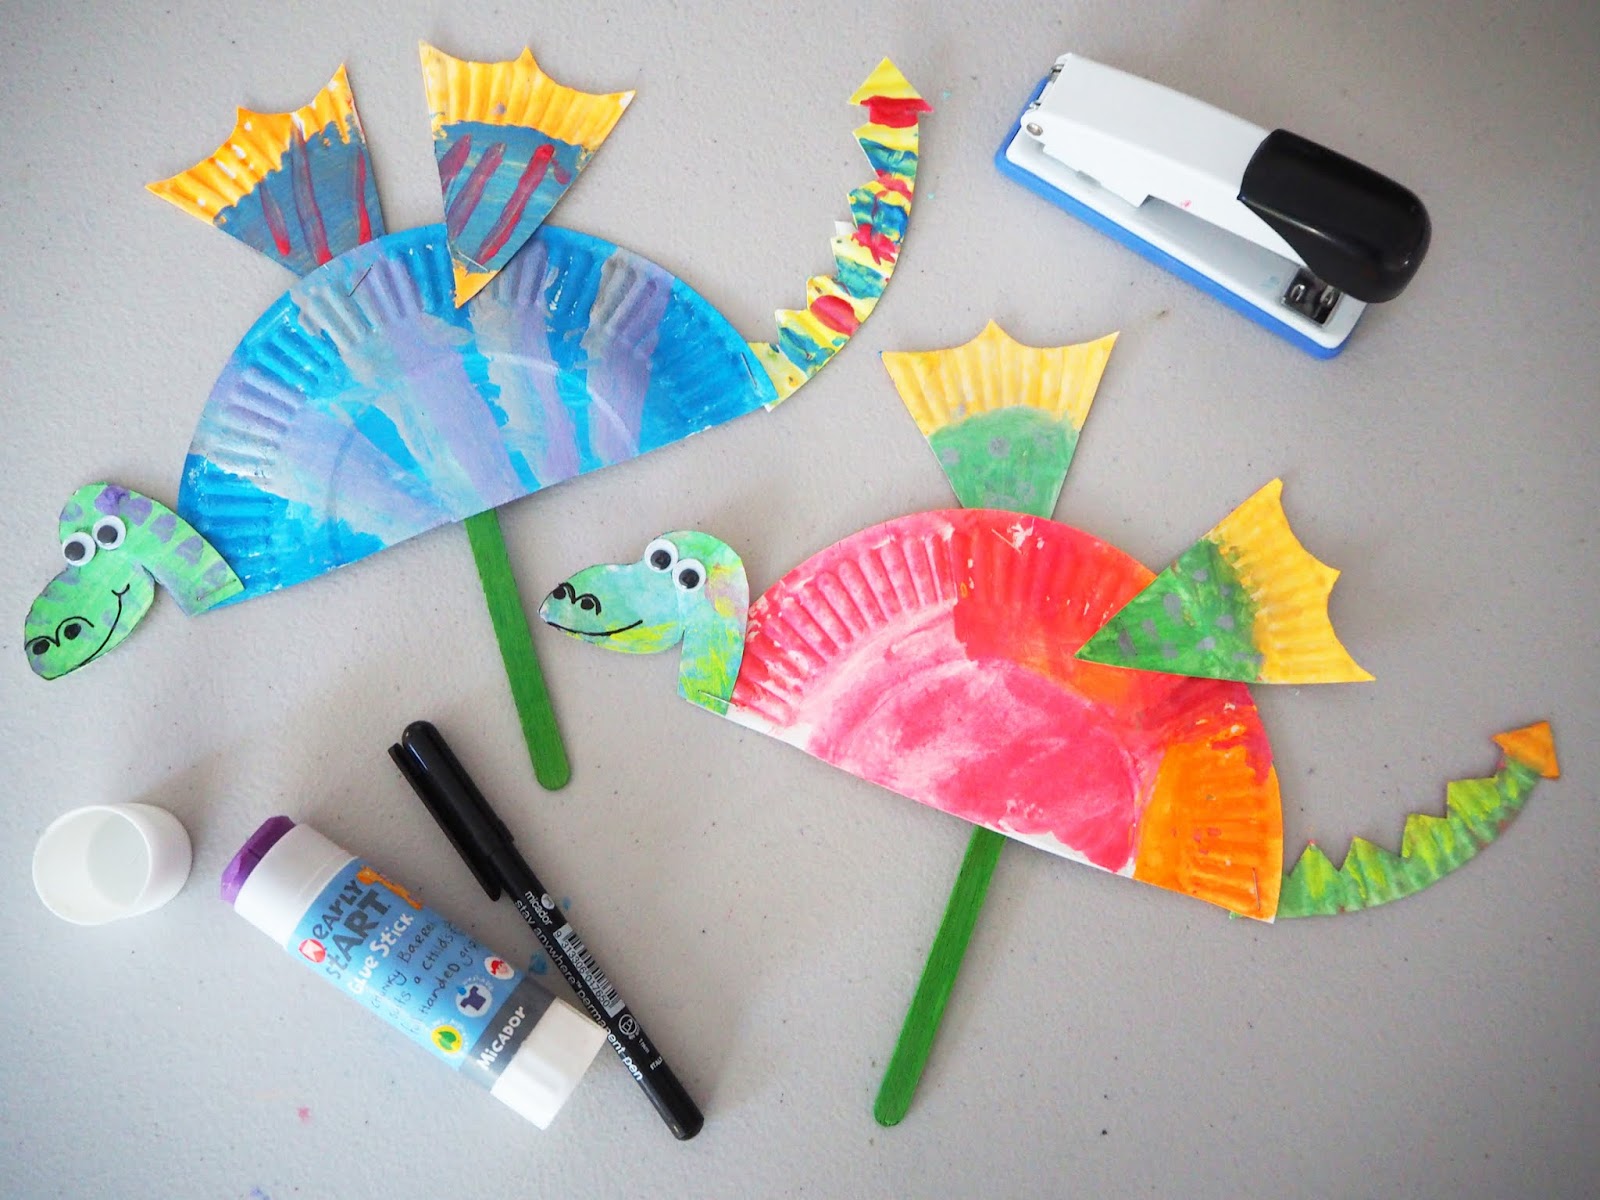 How to Make a Dragon: Crafts for Kids